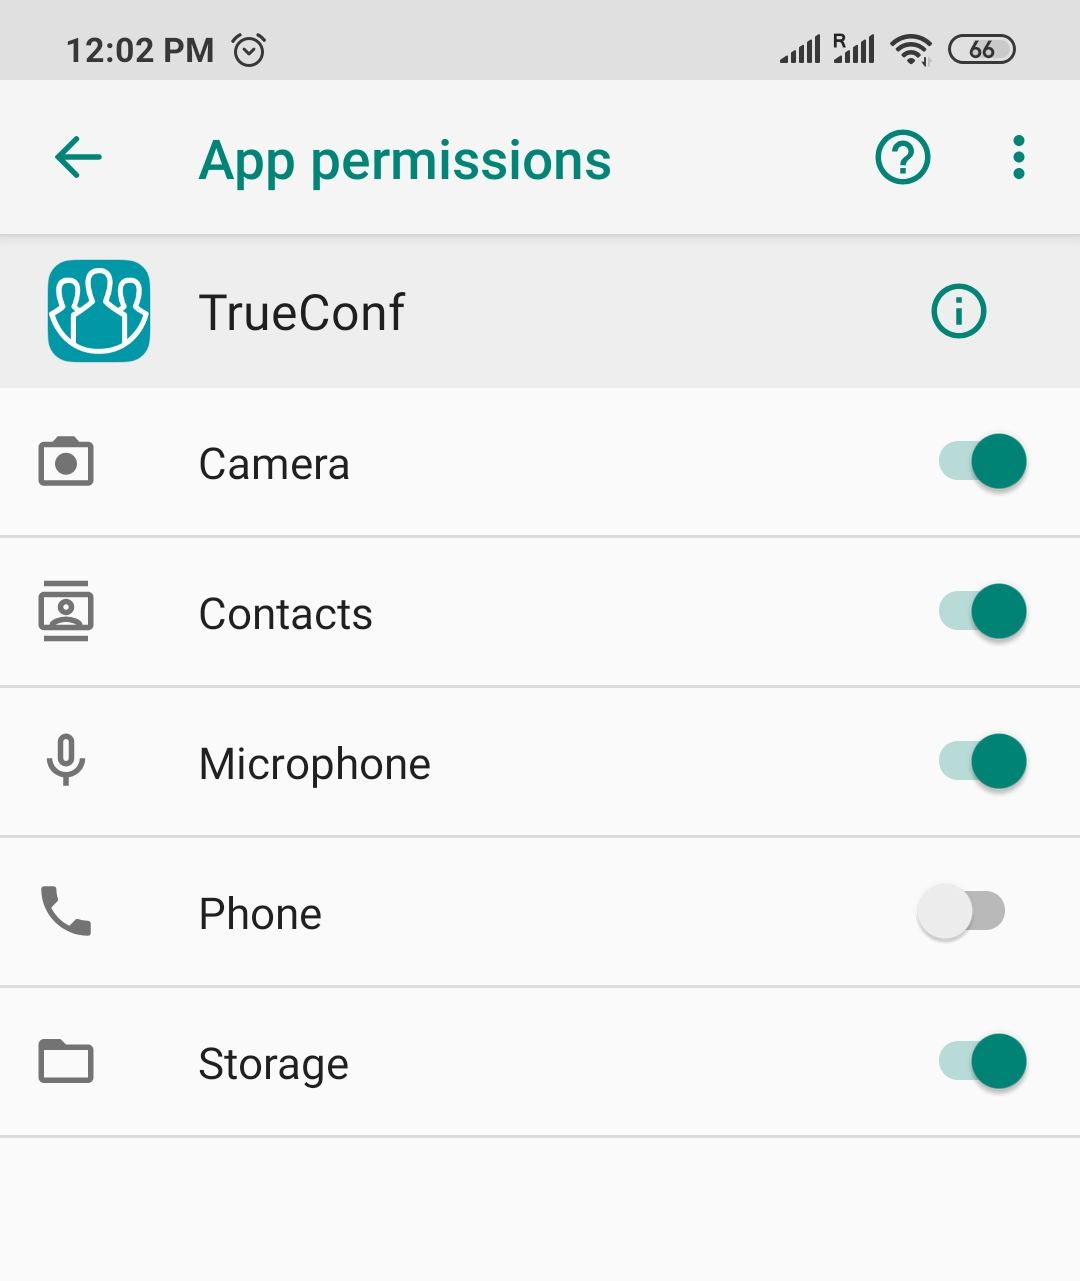 app permissions reset with update